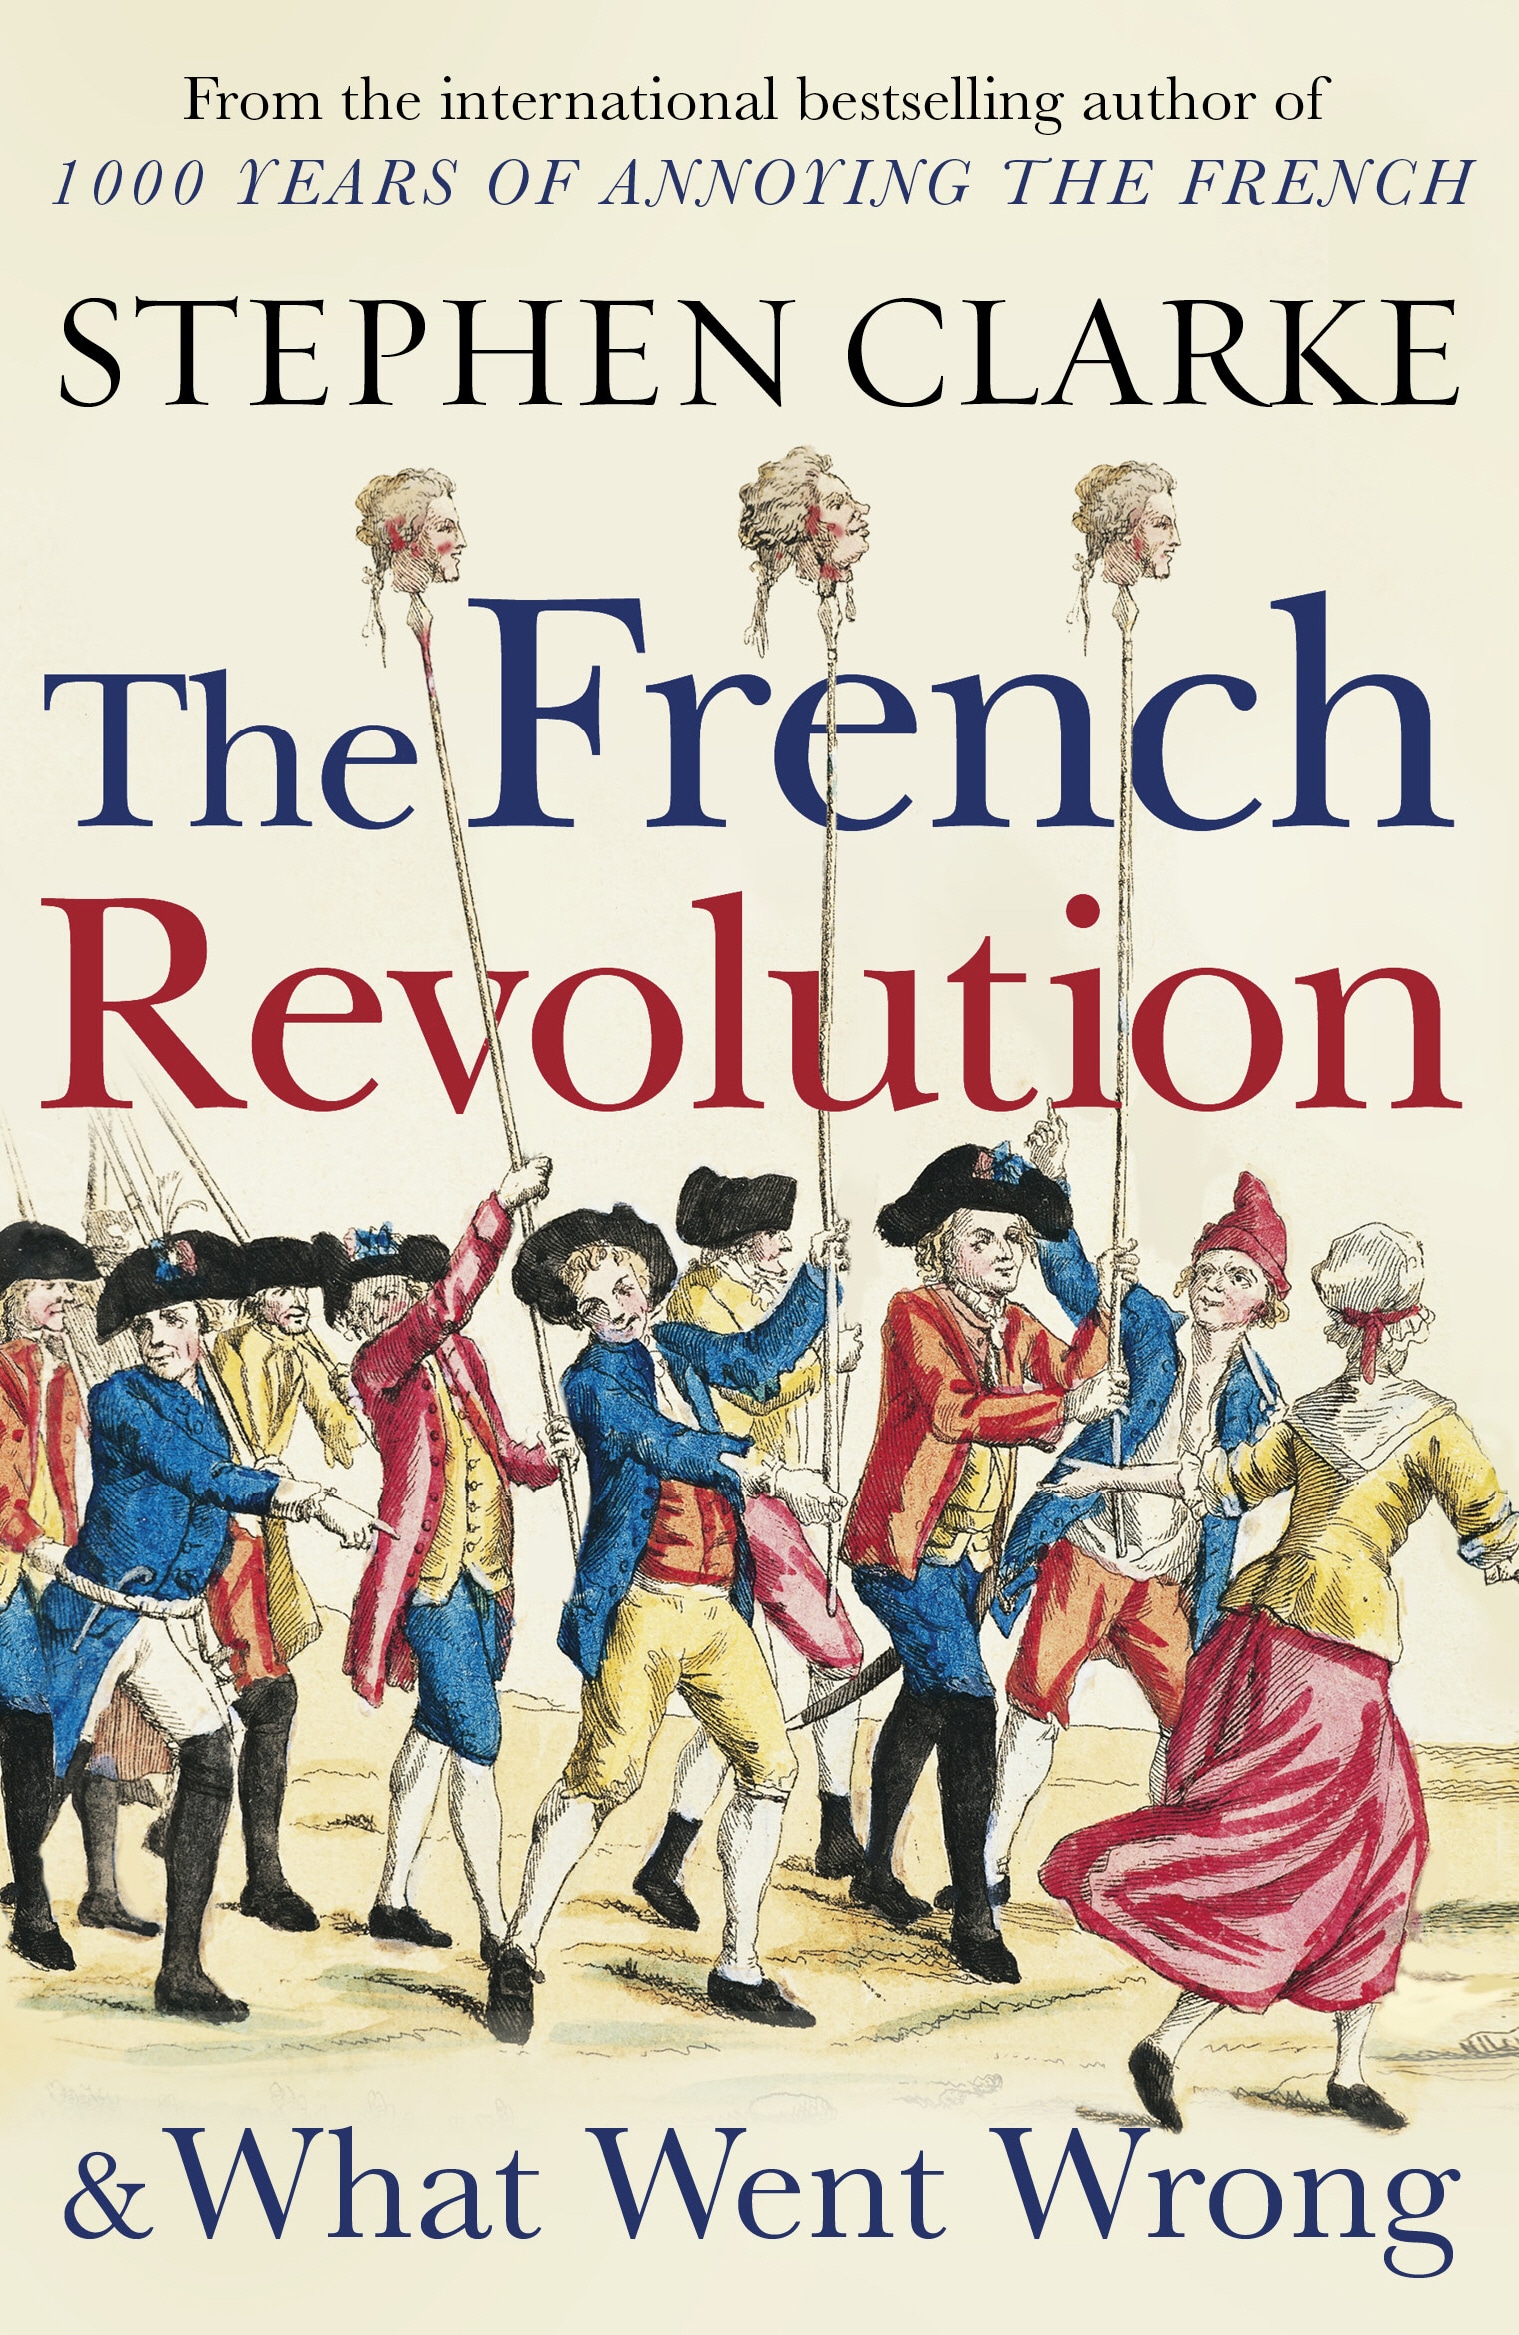 Book “The French Revolution and What Went Wrong” by Stephen Clarke — July 11, 2019